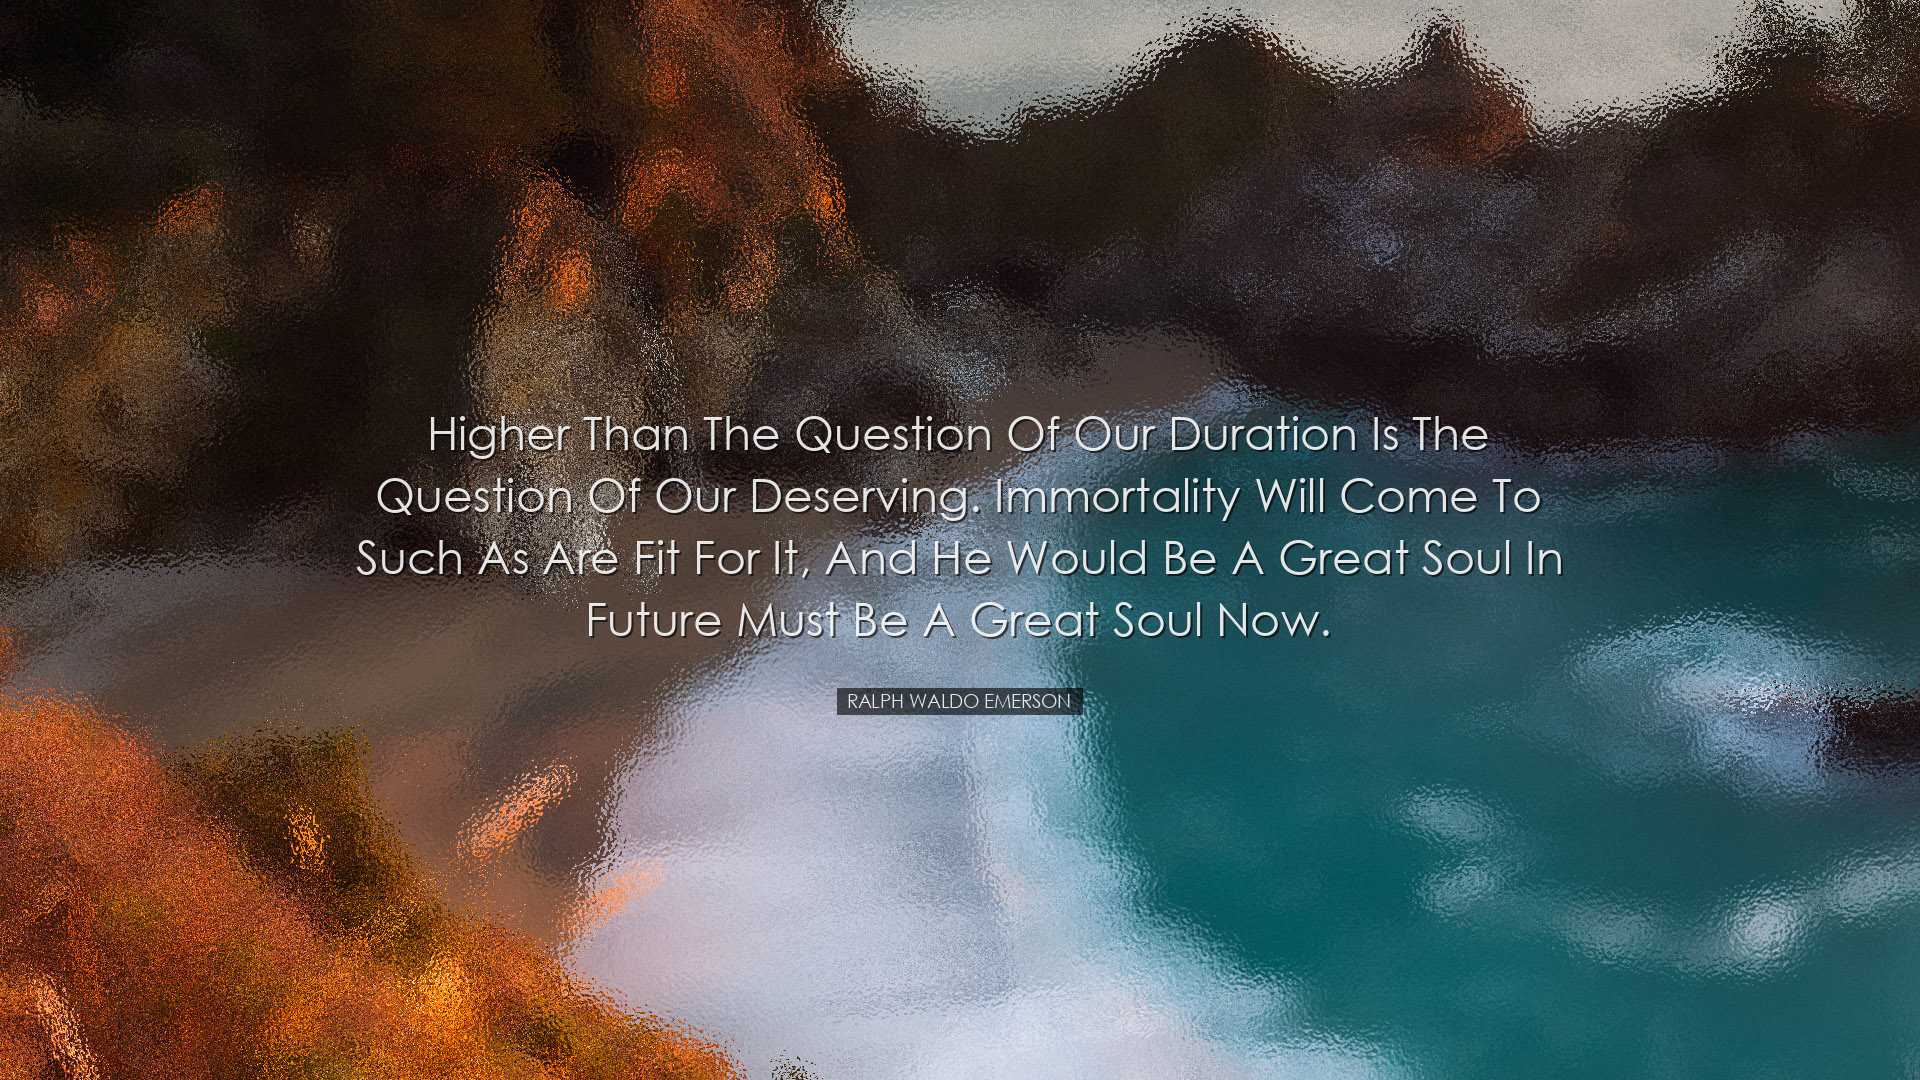 Higher than the question of our duration is the question of our de